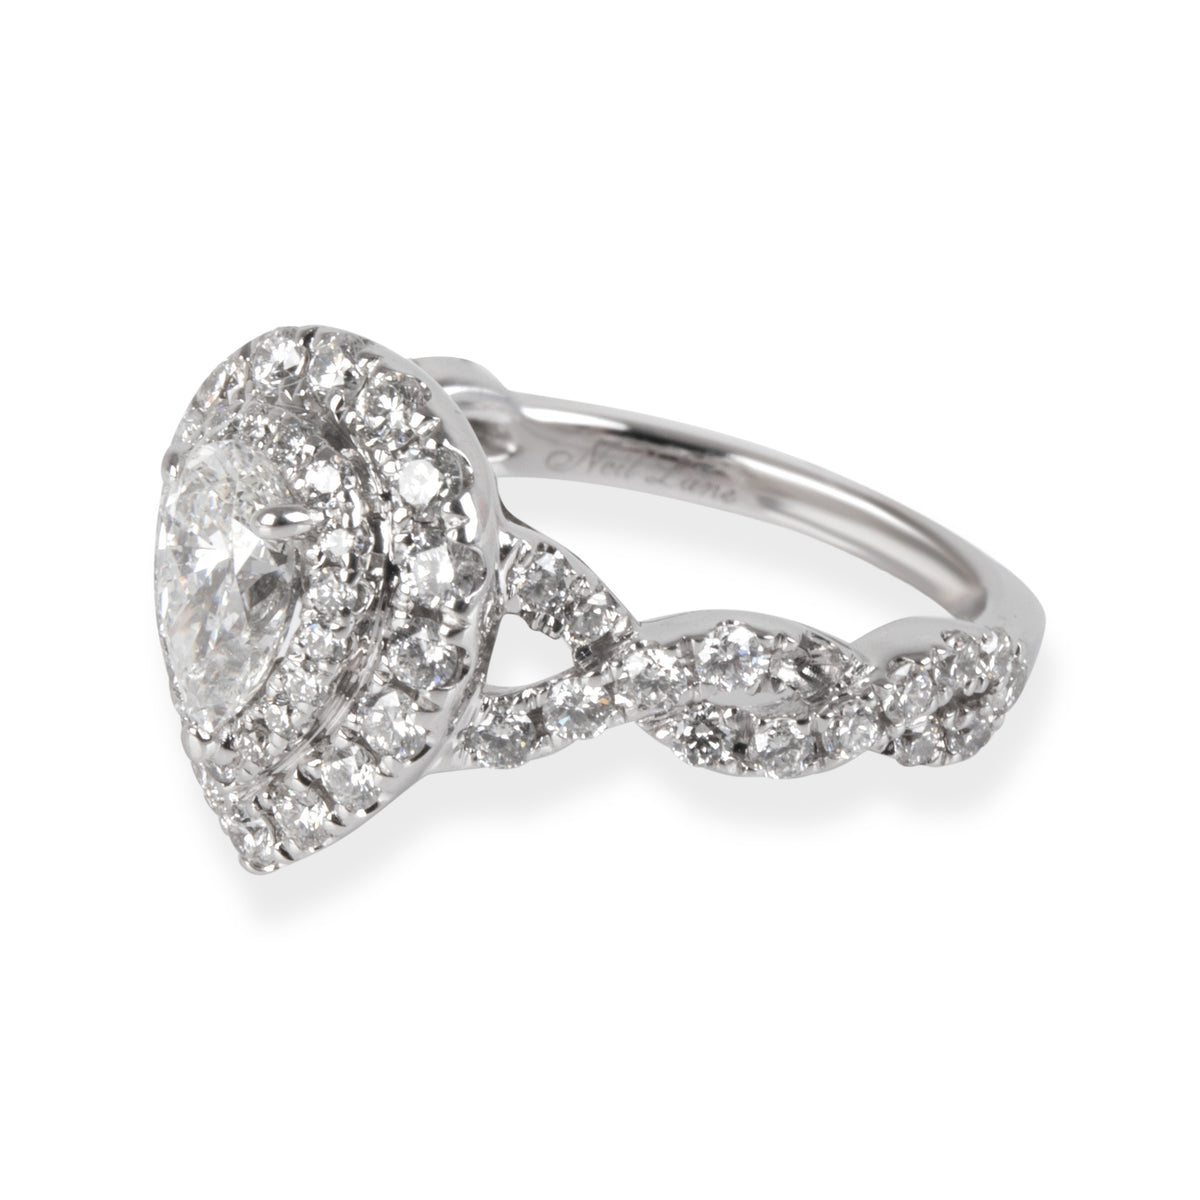 Neil Lane Double Halo Pear Diamond Engagement Ring in 14K White Gold 1.12 ctw